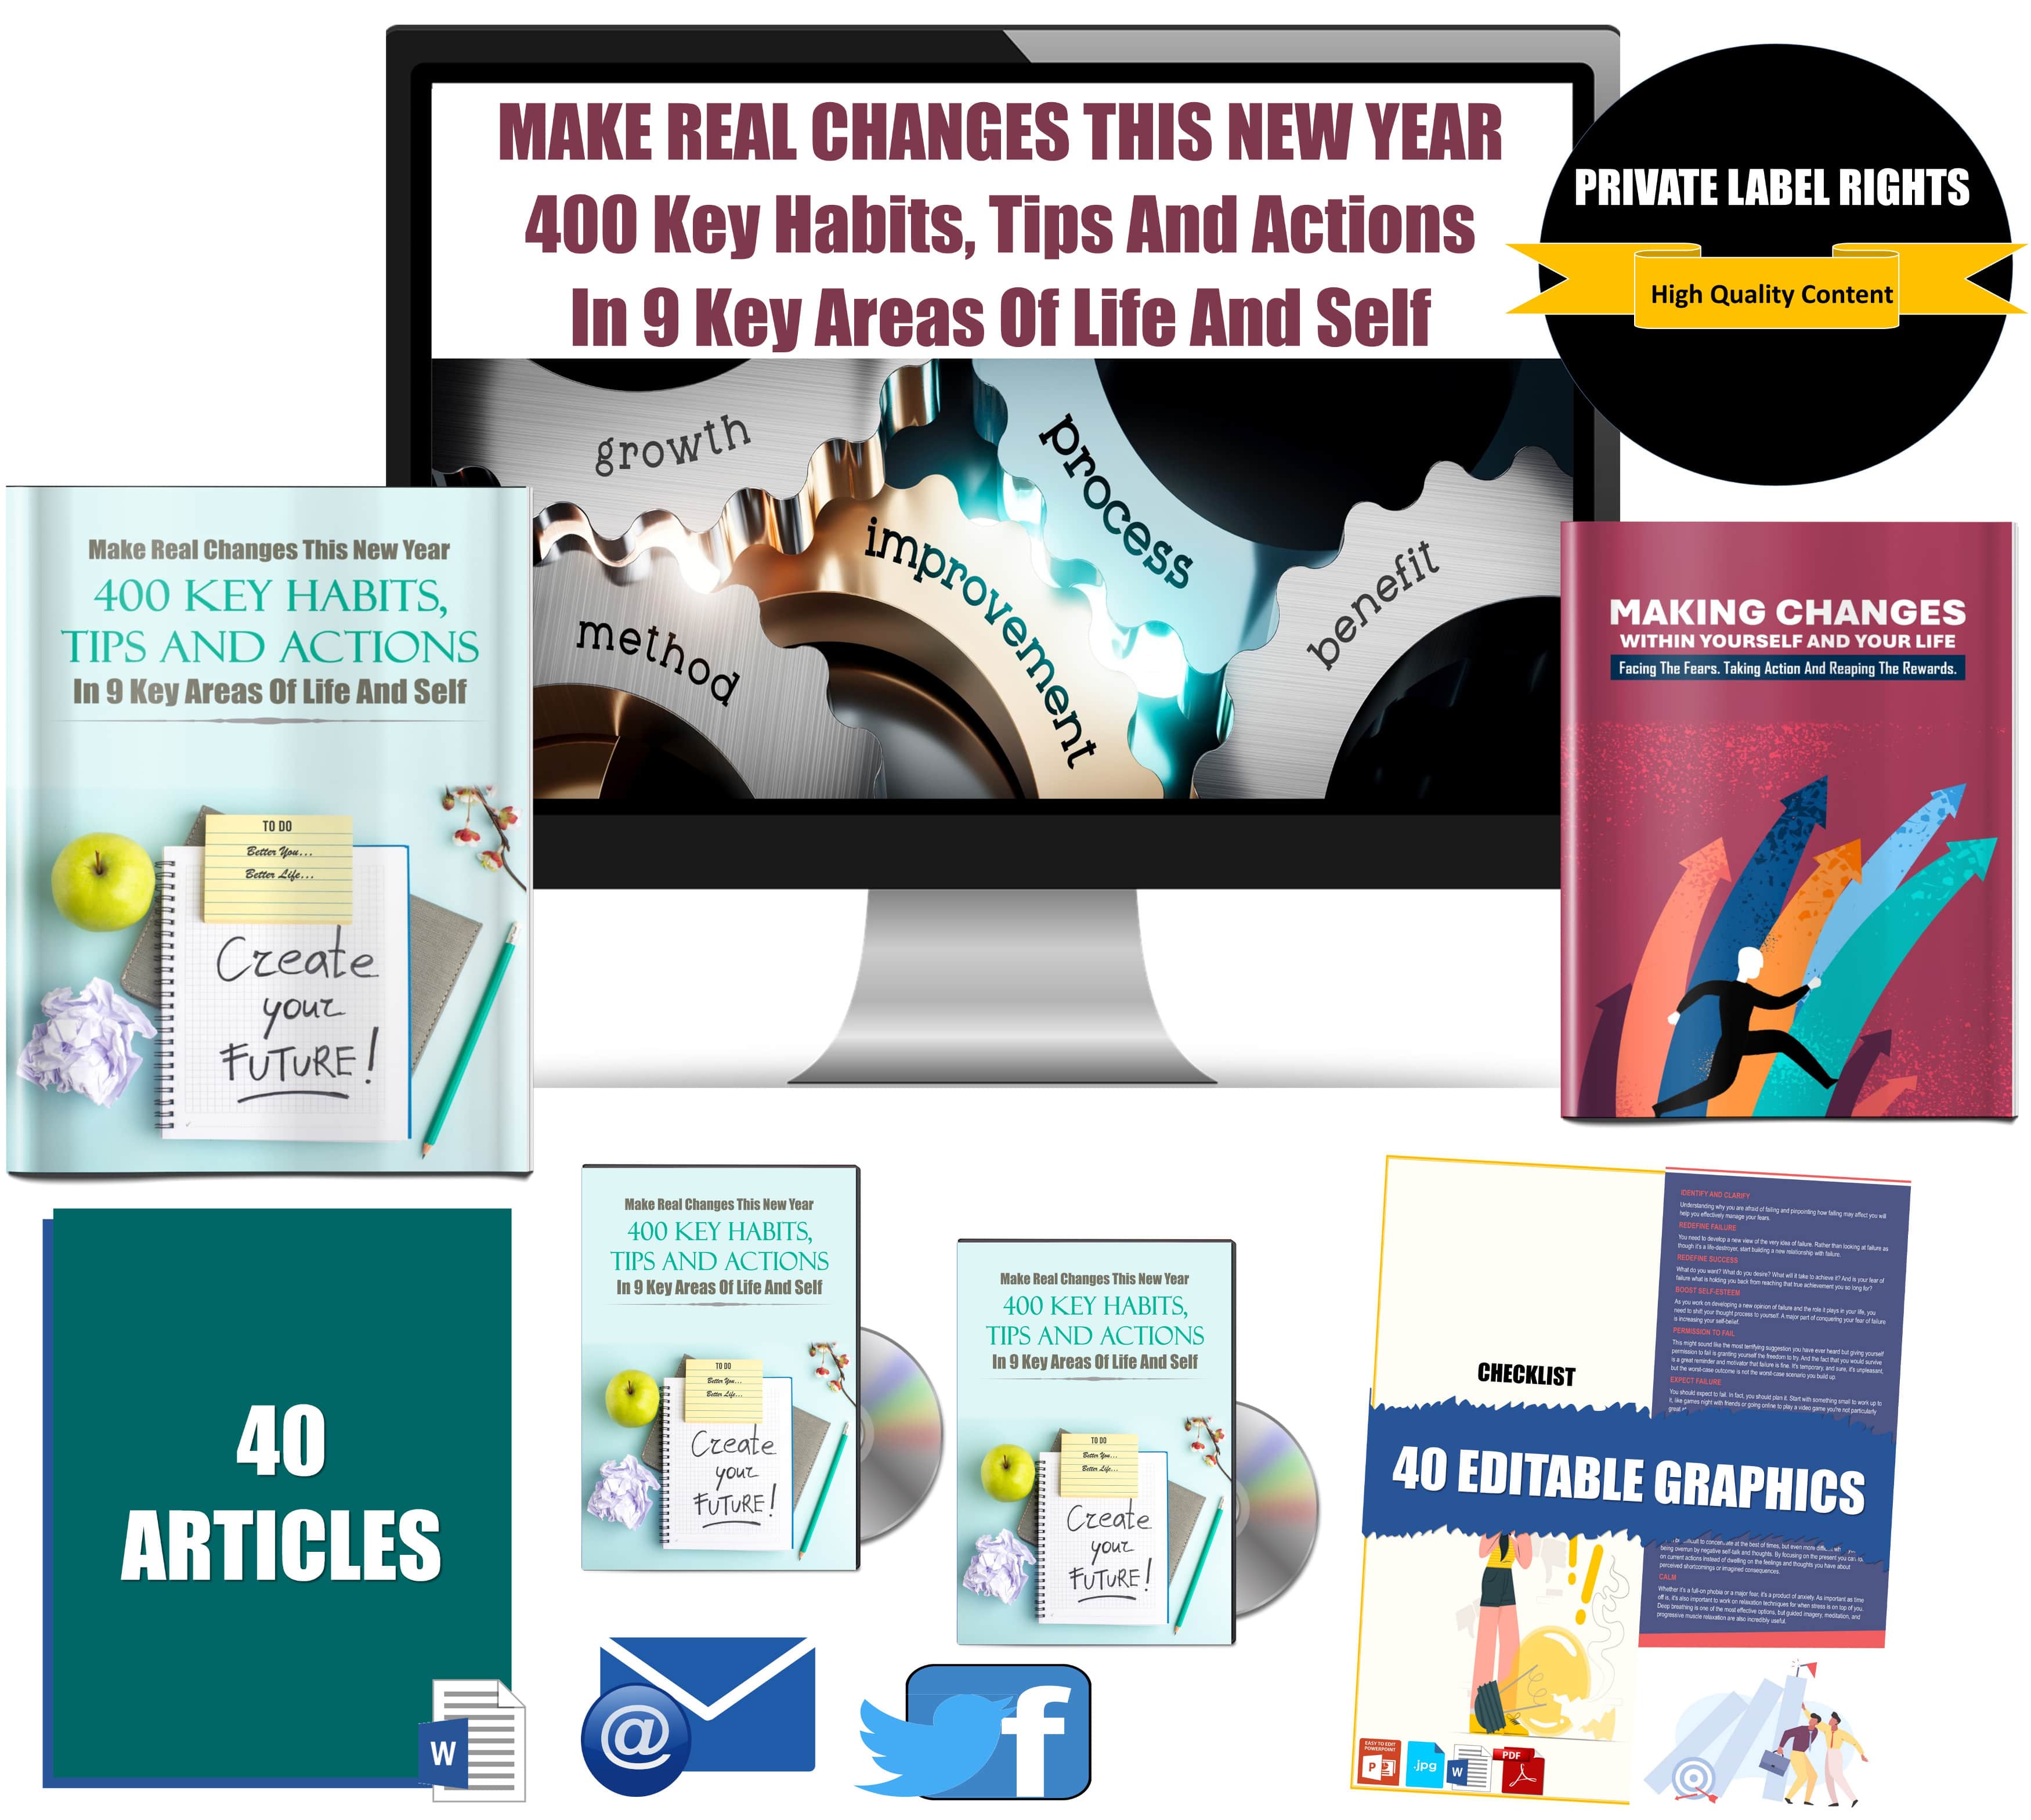 Make Real Changes This New Year 400 Key Habits, Tips And Actions In 9 Key Areas Of Life And Self Content Pack with PLR Rights